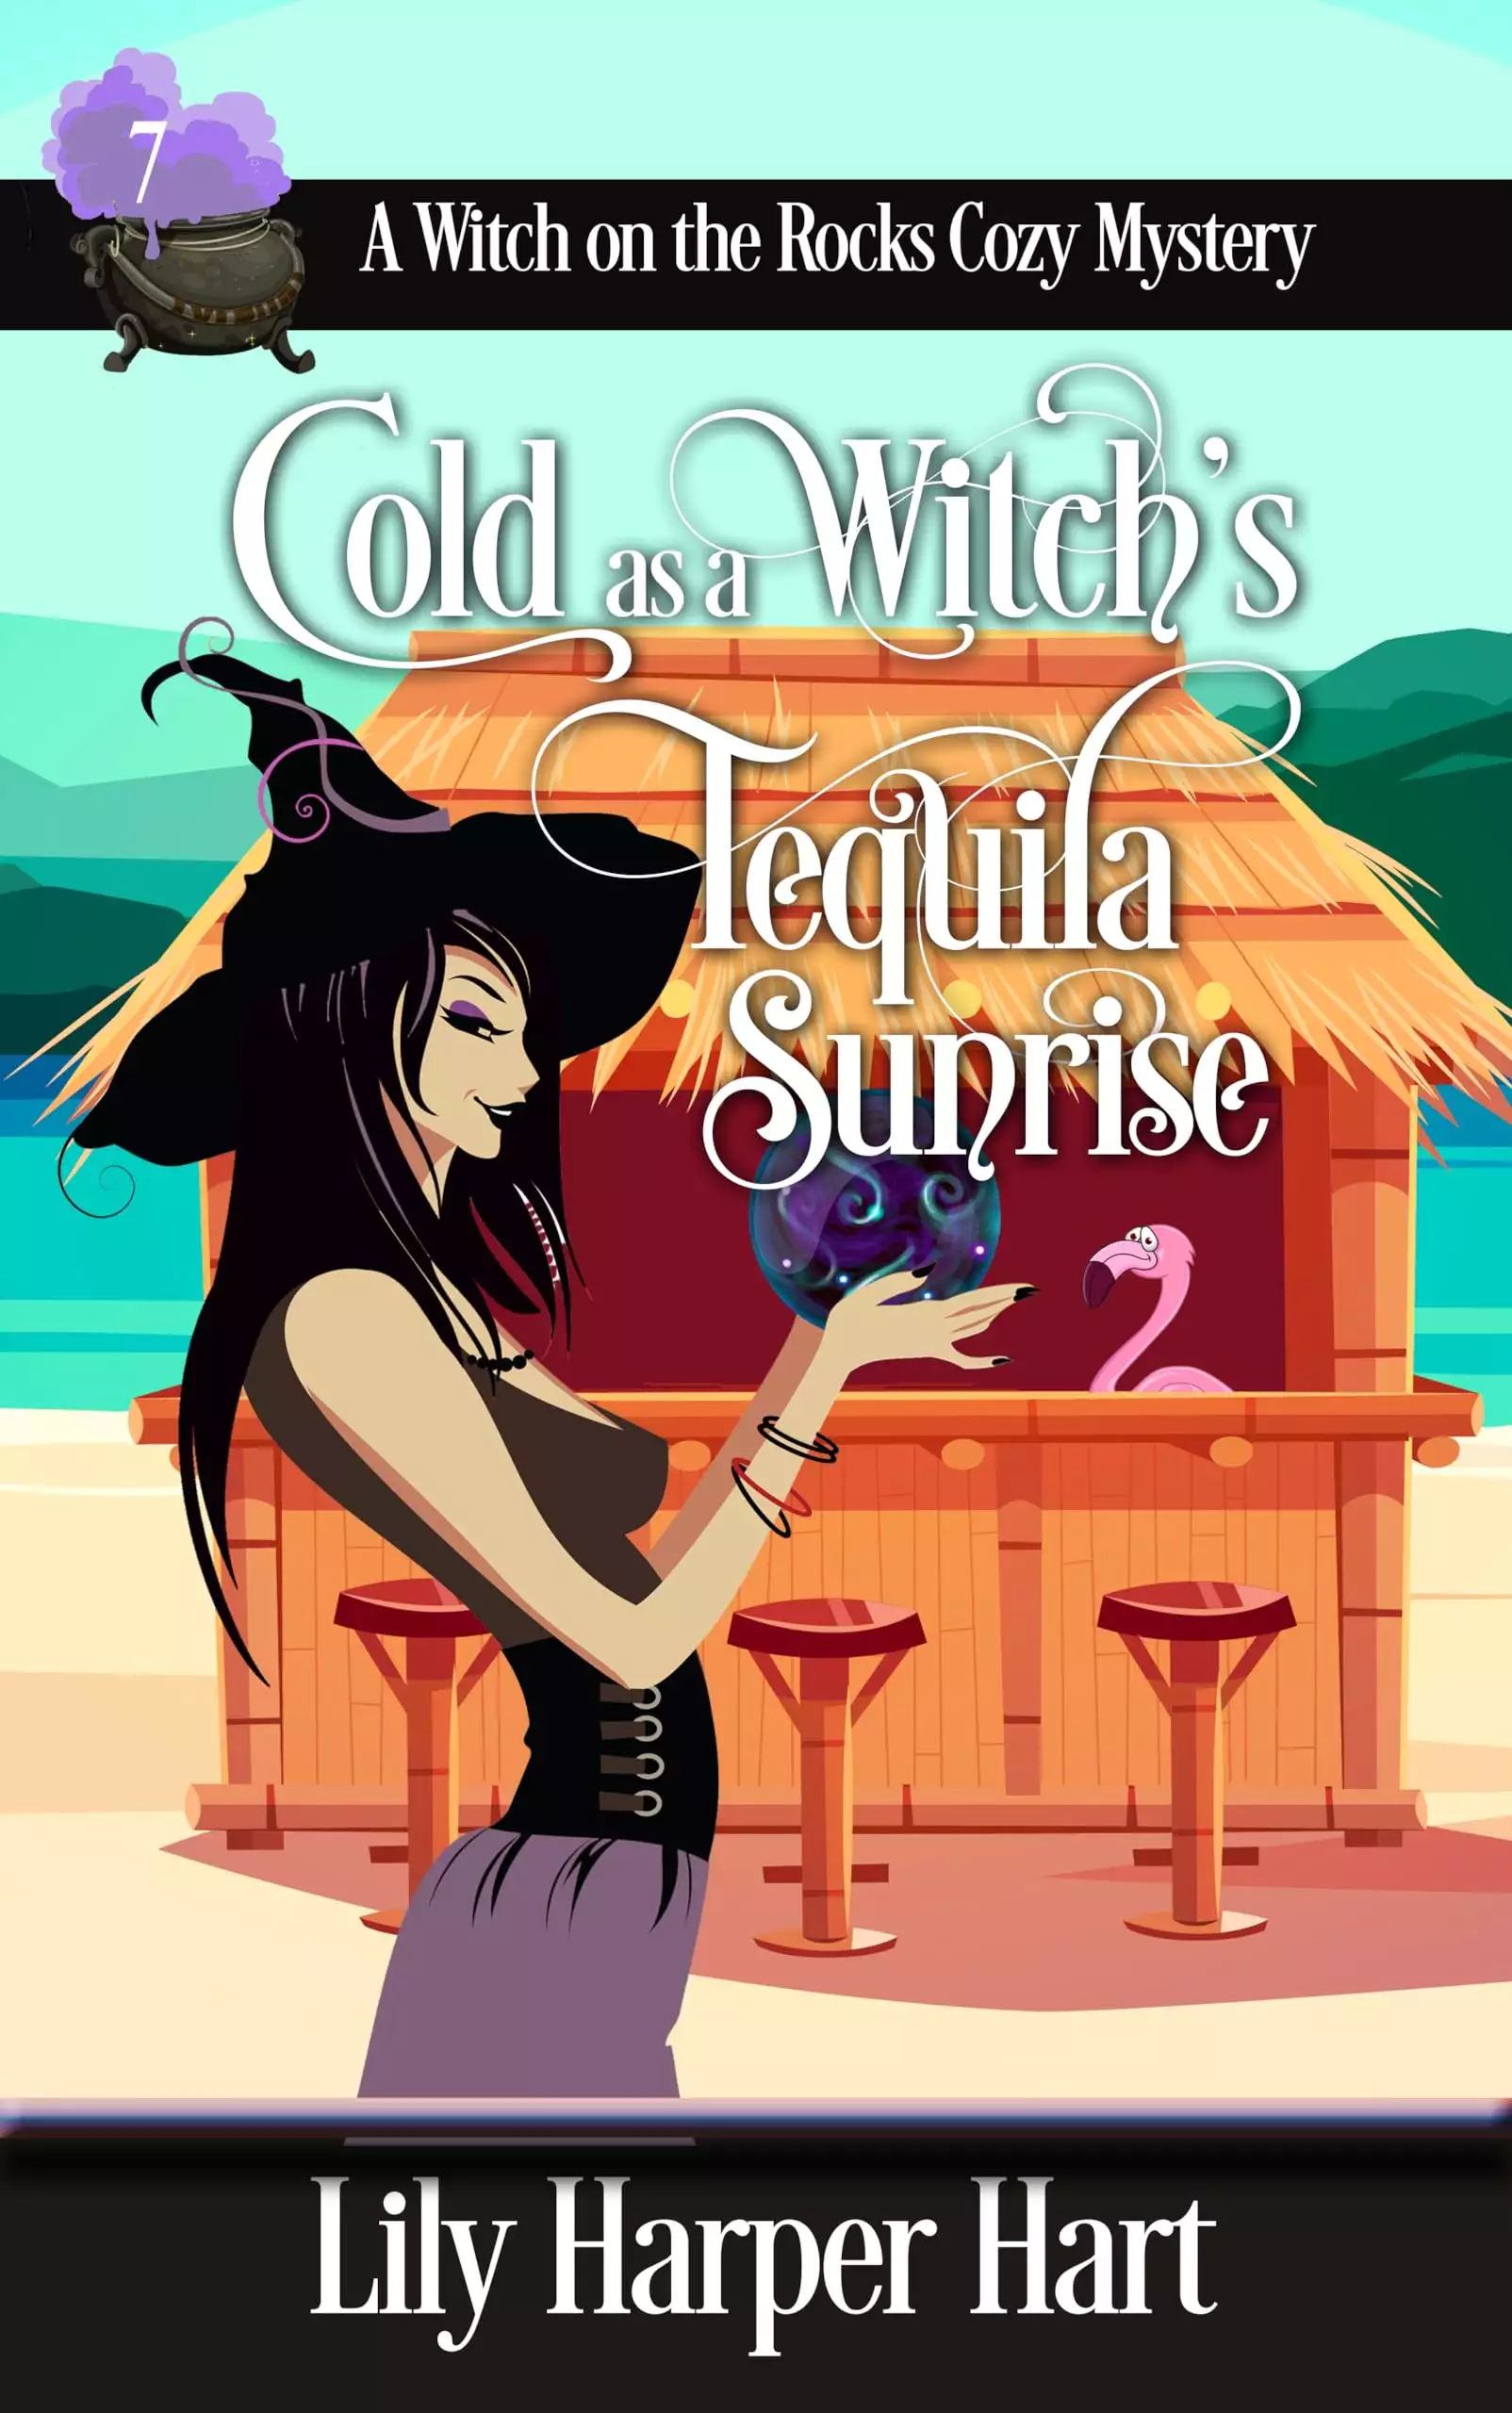 Cold as a Witch's Tequila Sunrise